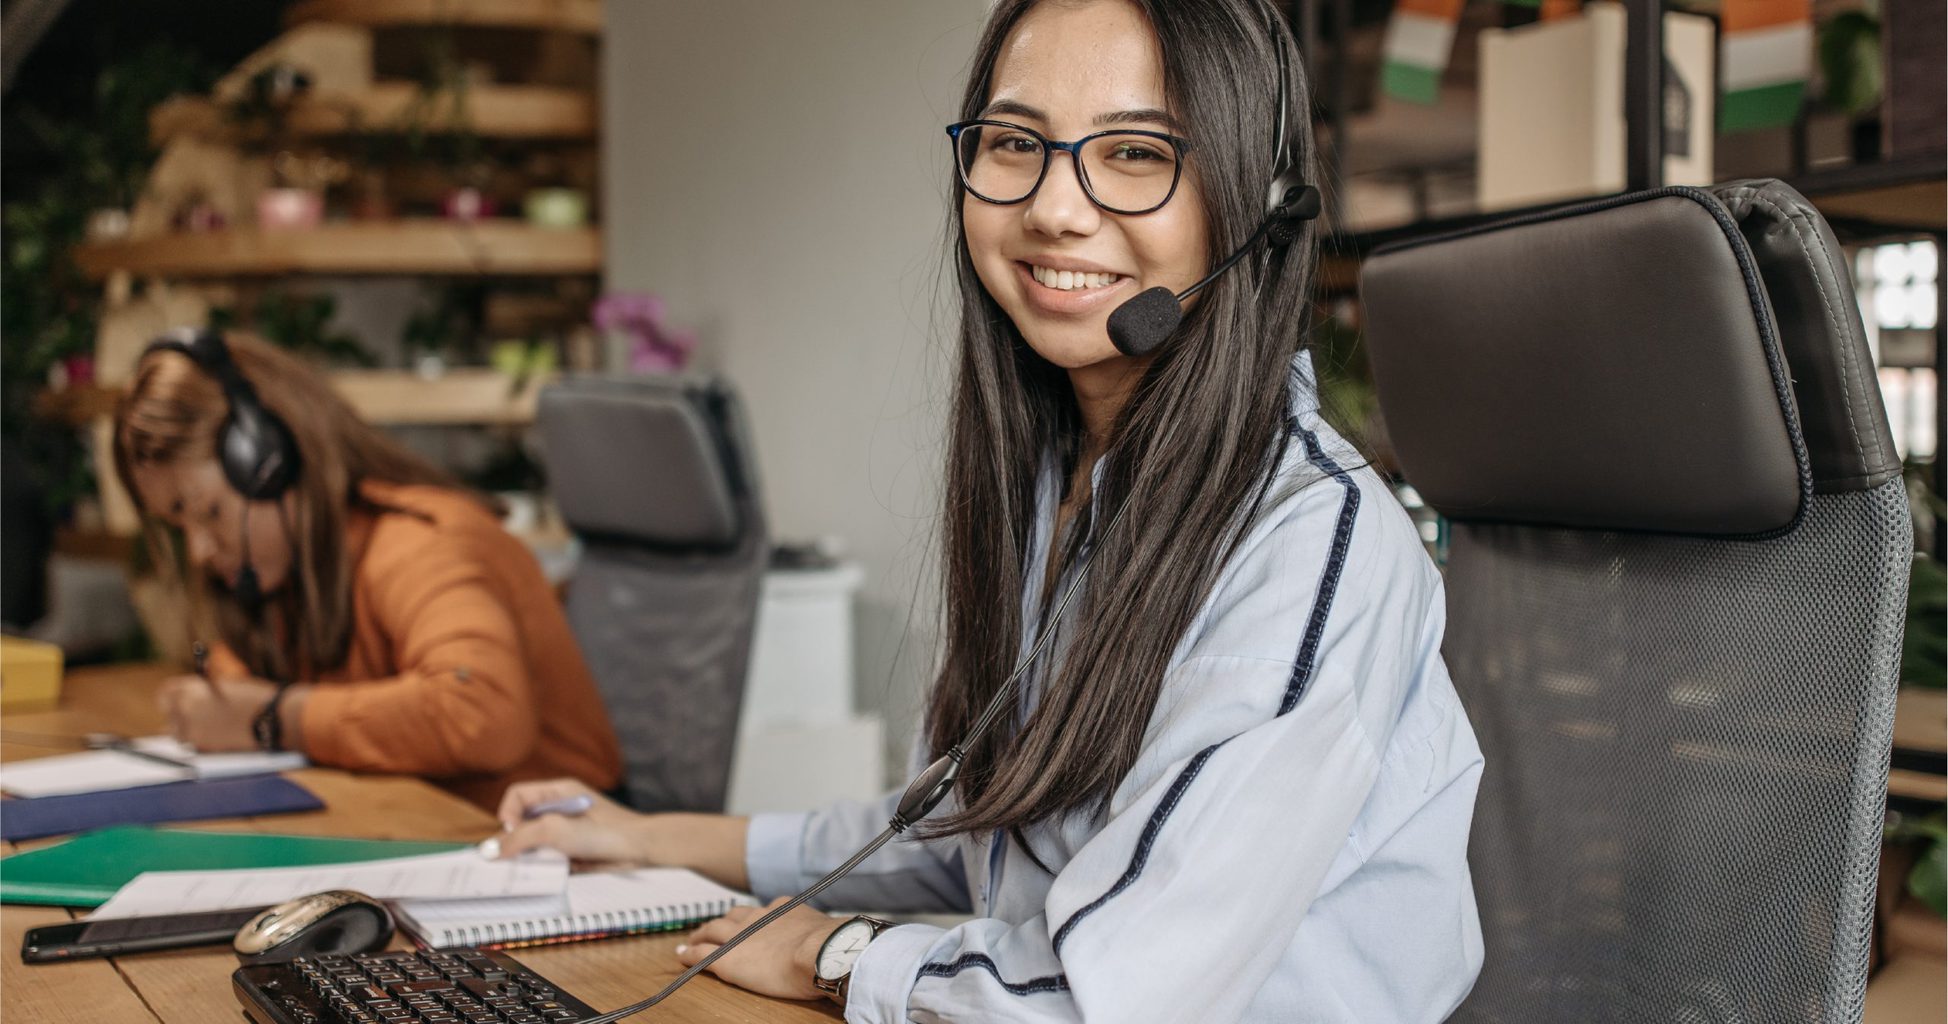 How to Build the Best Remote Customer Service Team for Your Business